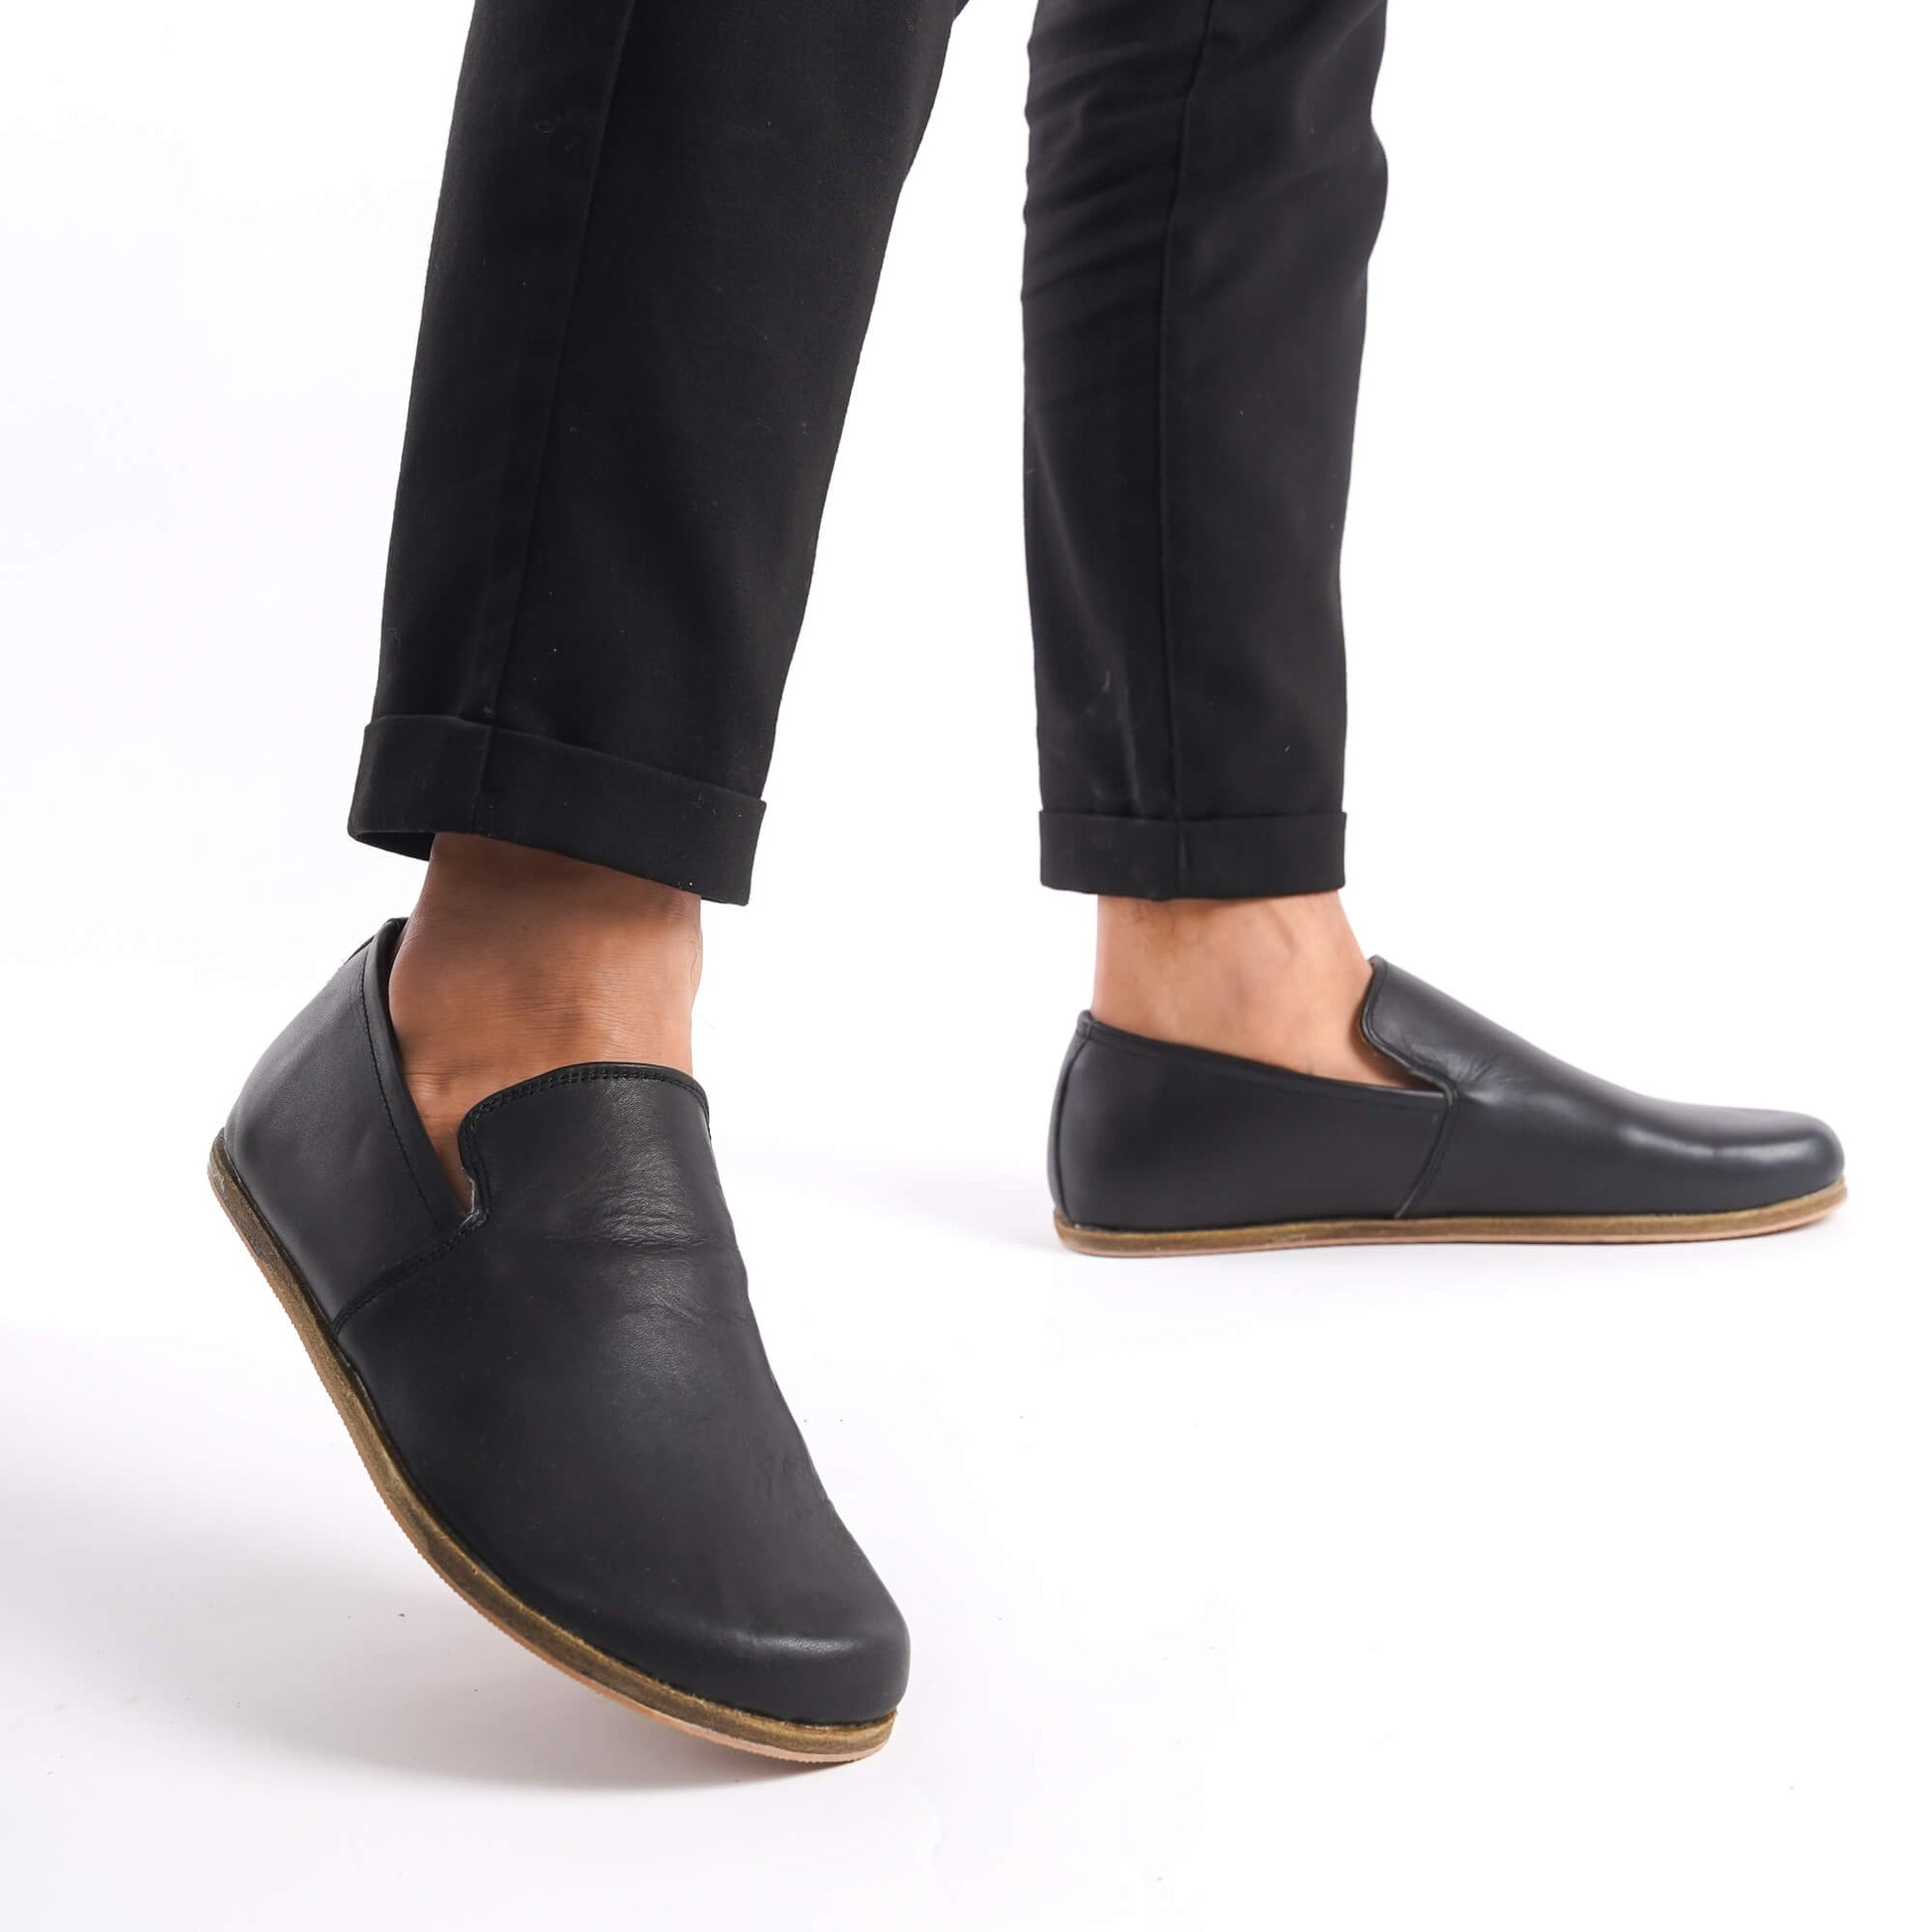 Men's feet wearing Aeolia Leather Barefoot Men Loafers in black with black pants - shop at pelanir.com.